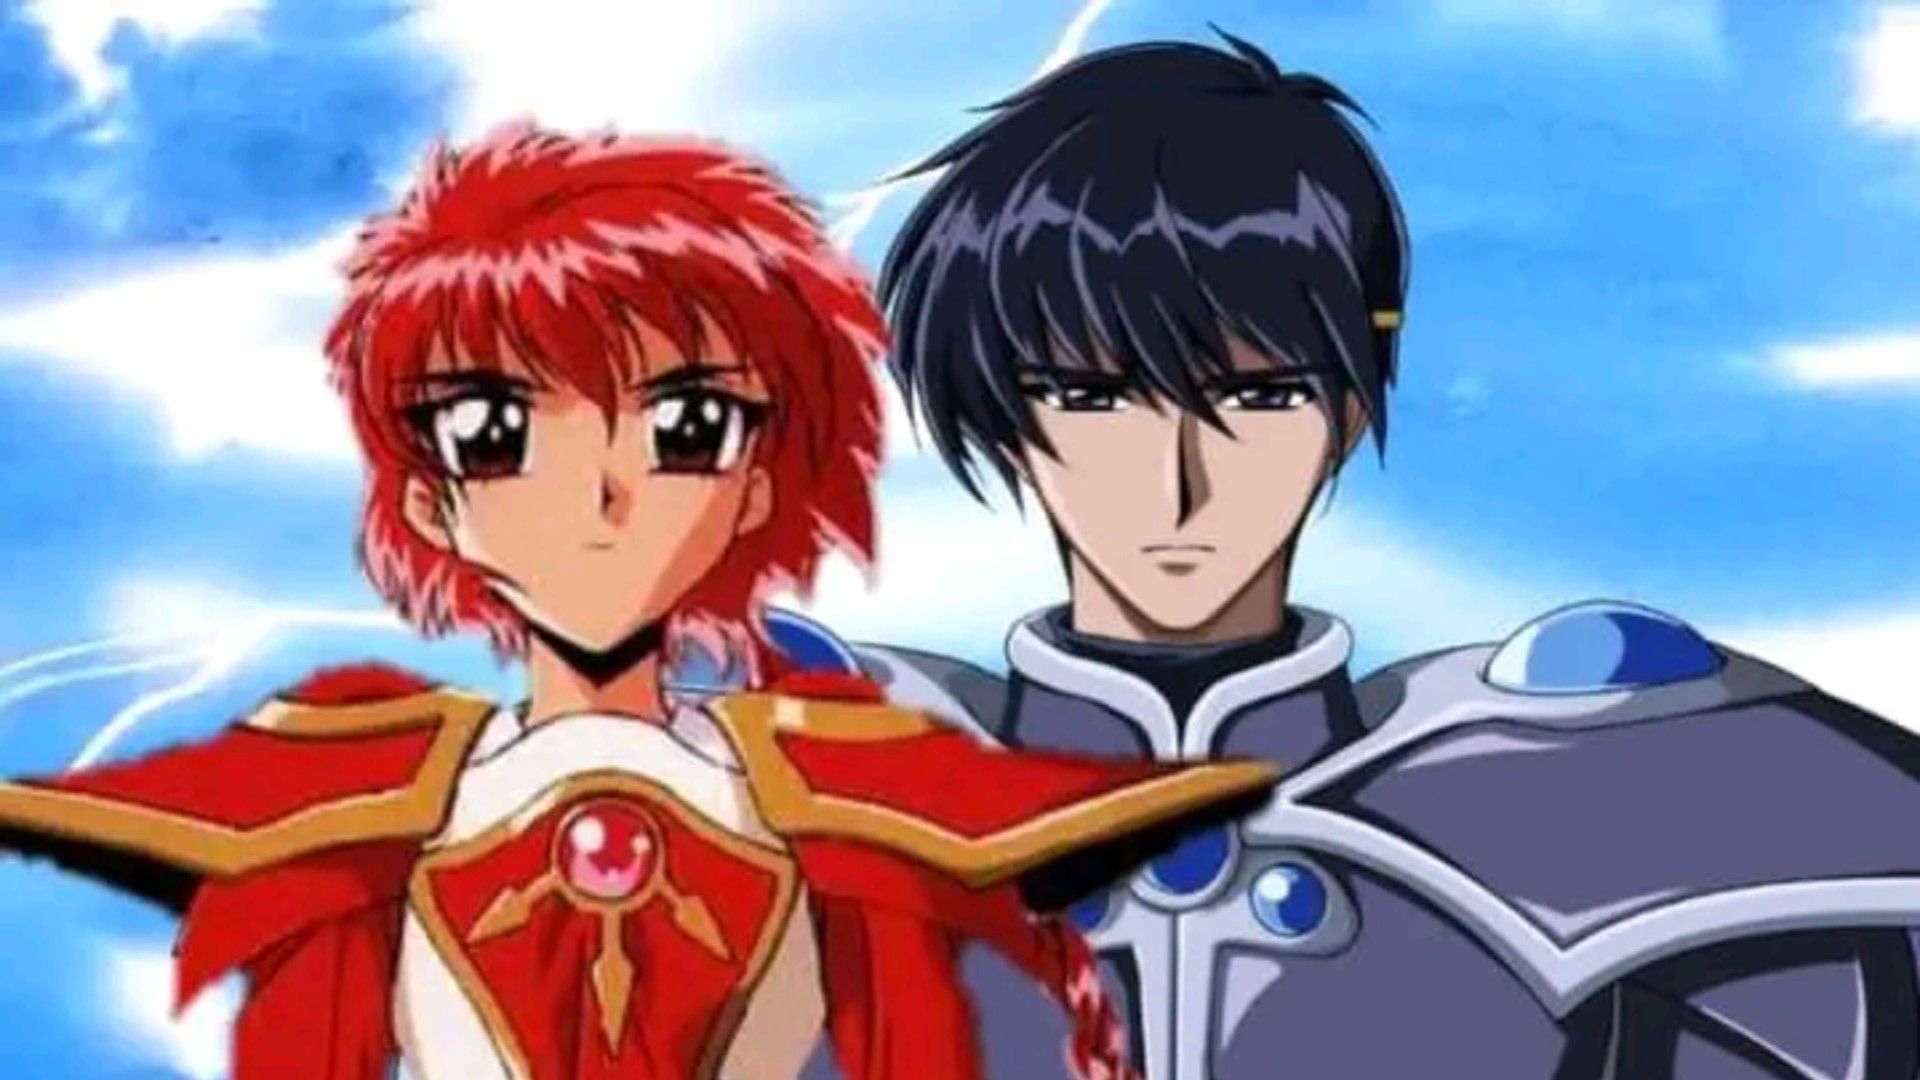 For Magic Knight Rayearth Fans] Let's talk about Lantis : r/anime